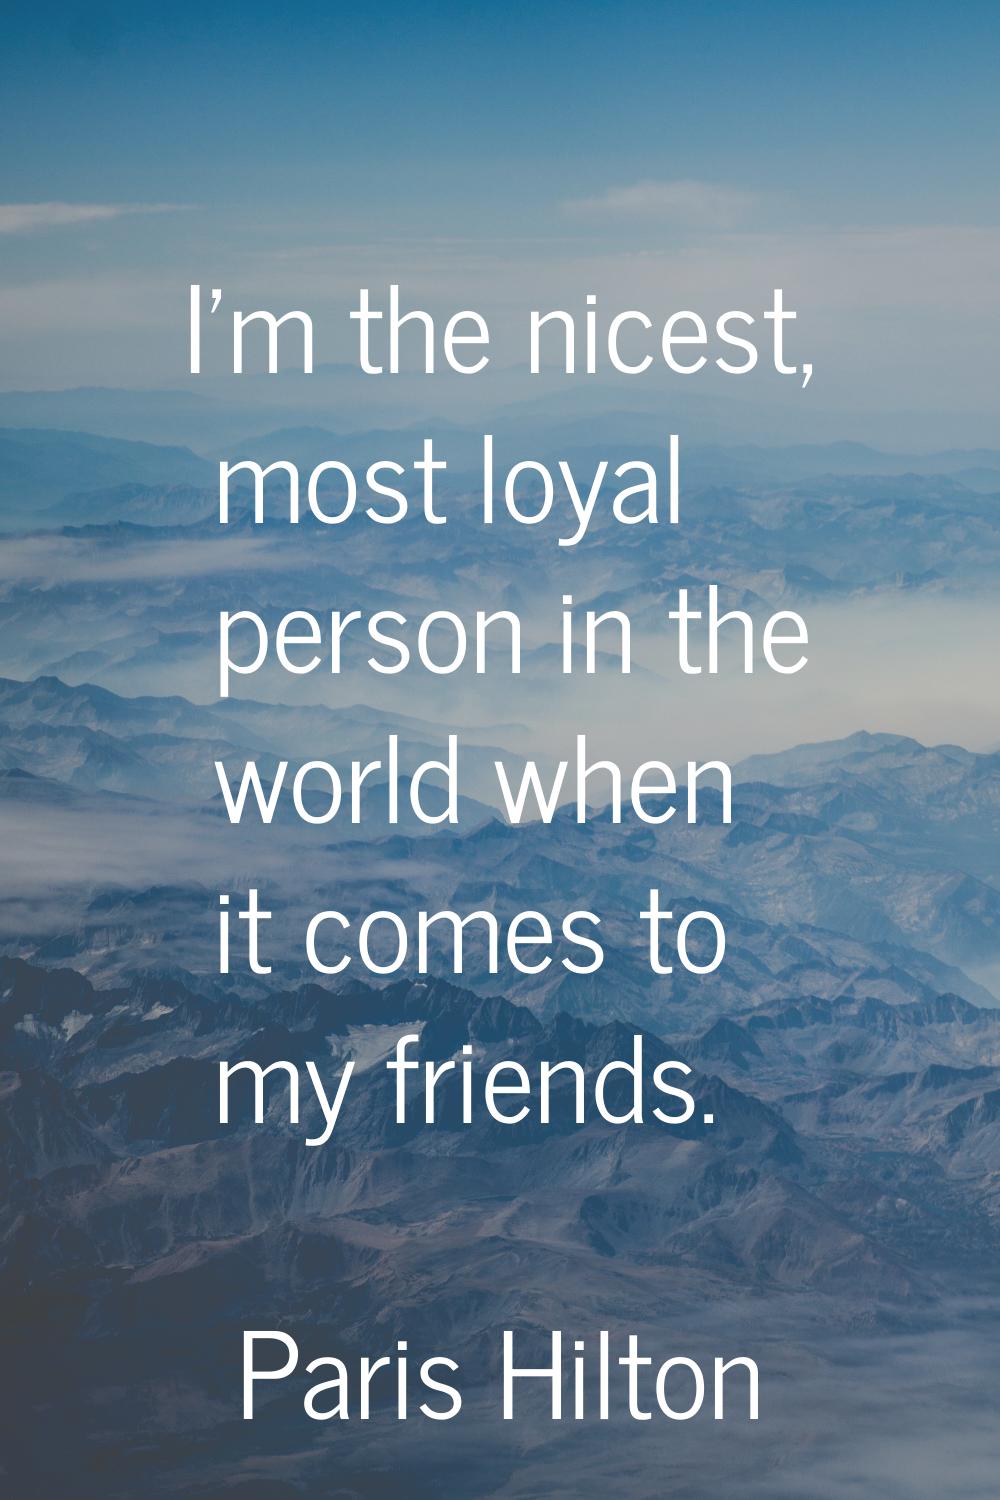 I'm the nicest, most loyal person in the world when it comes to my friends.